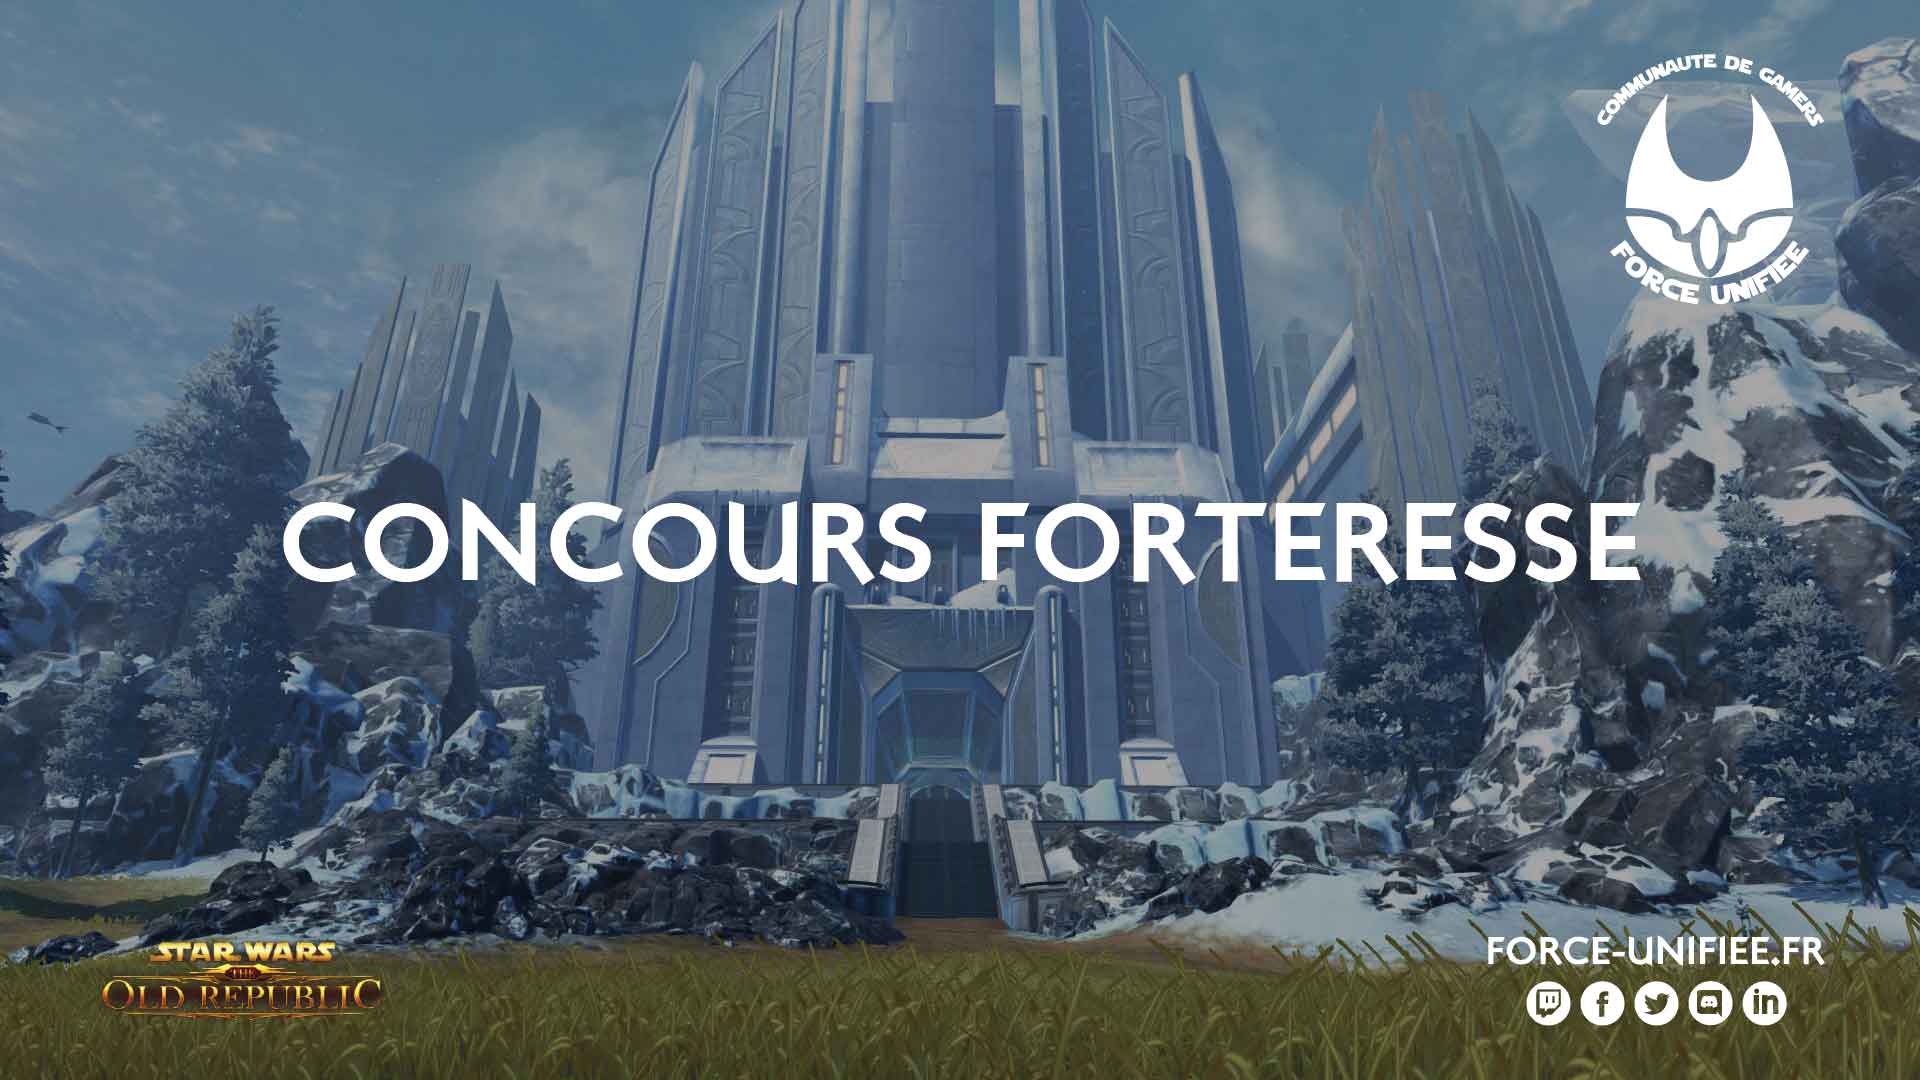 You are currently viewing Concours forteresse